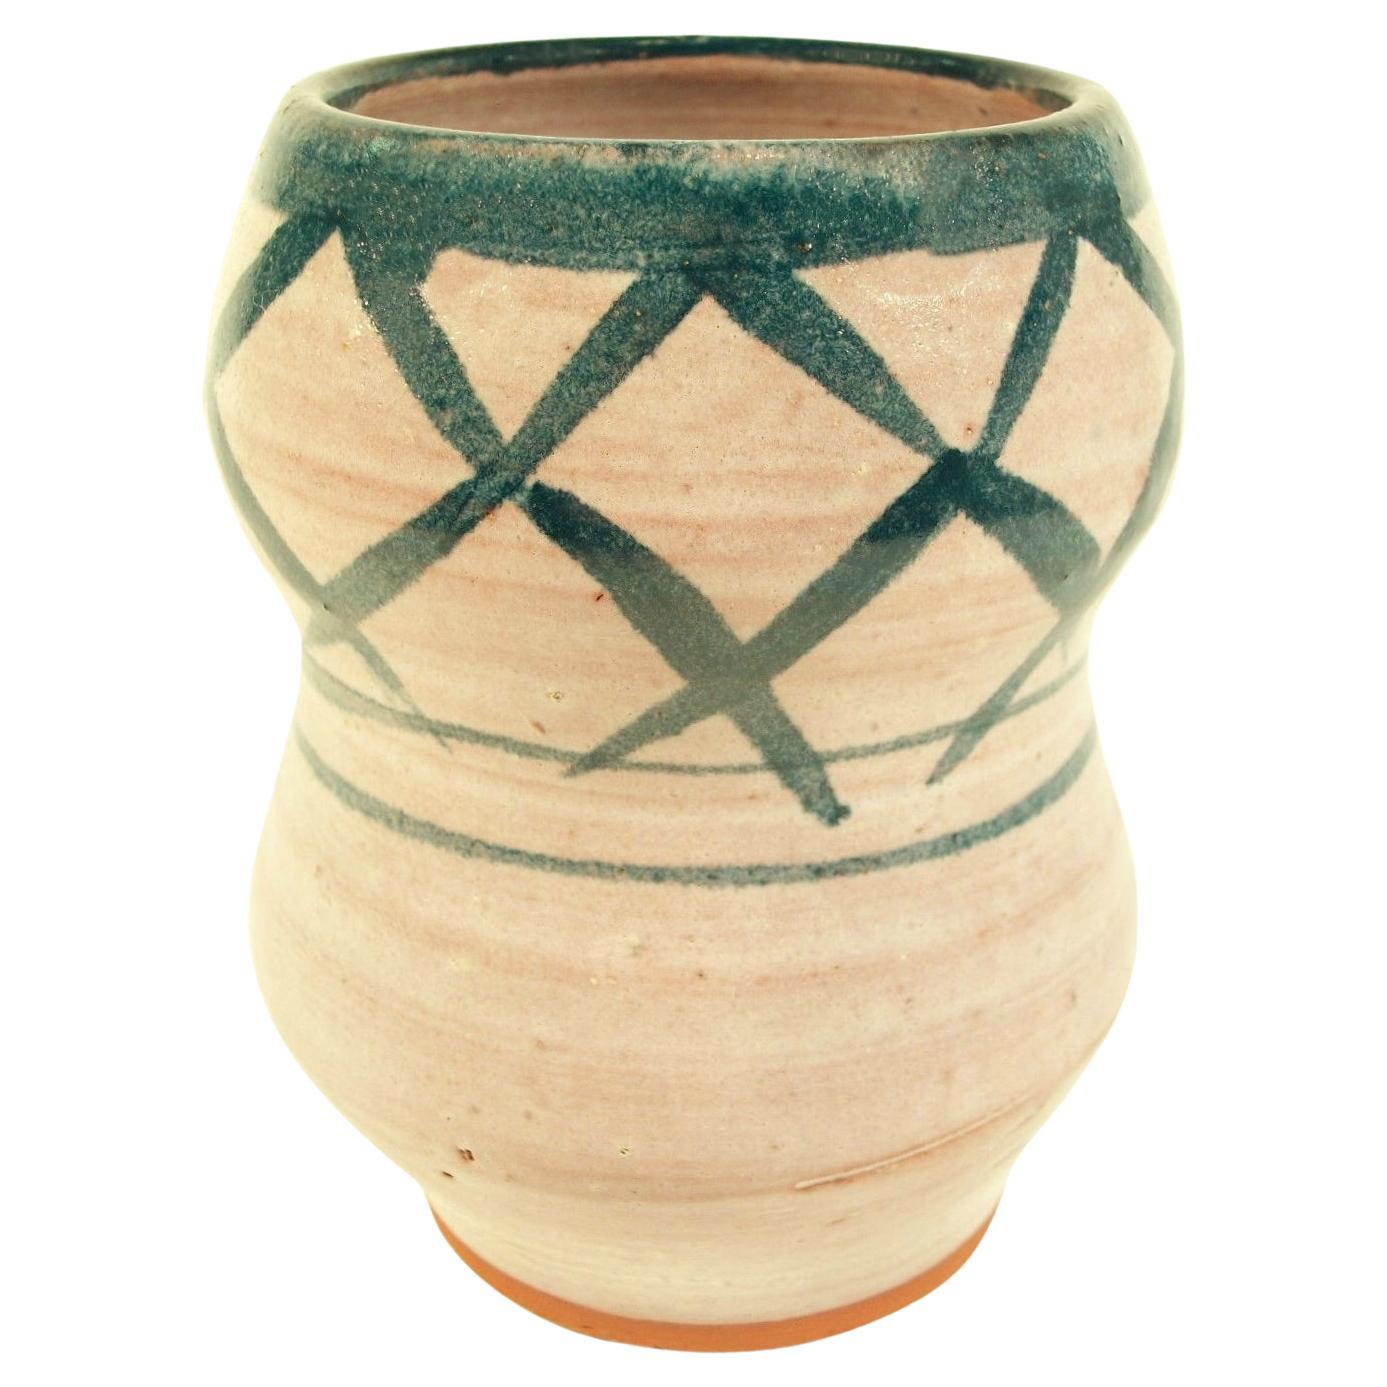 JANE SACHS - Mid Century Painted Terracotta Studio Pottery Vase - Canada - 1978 For Sale